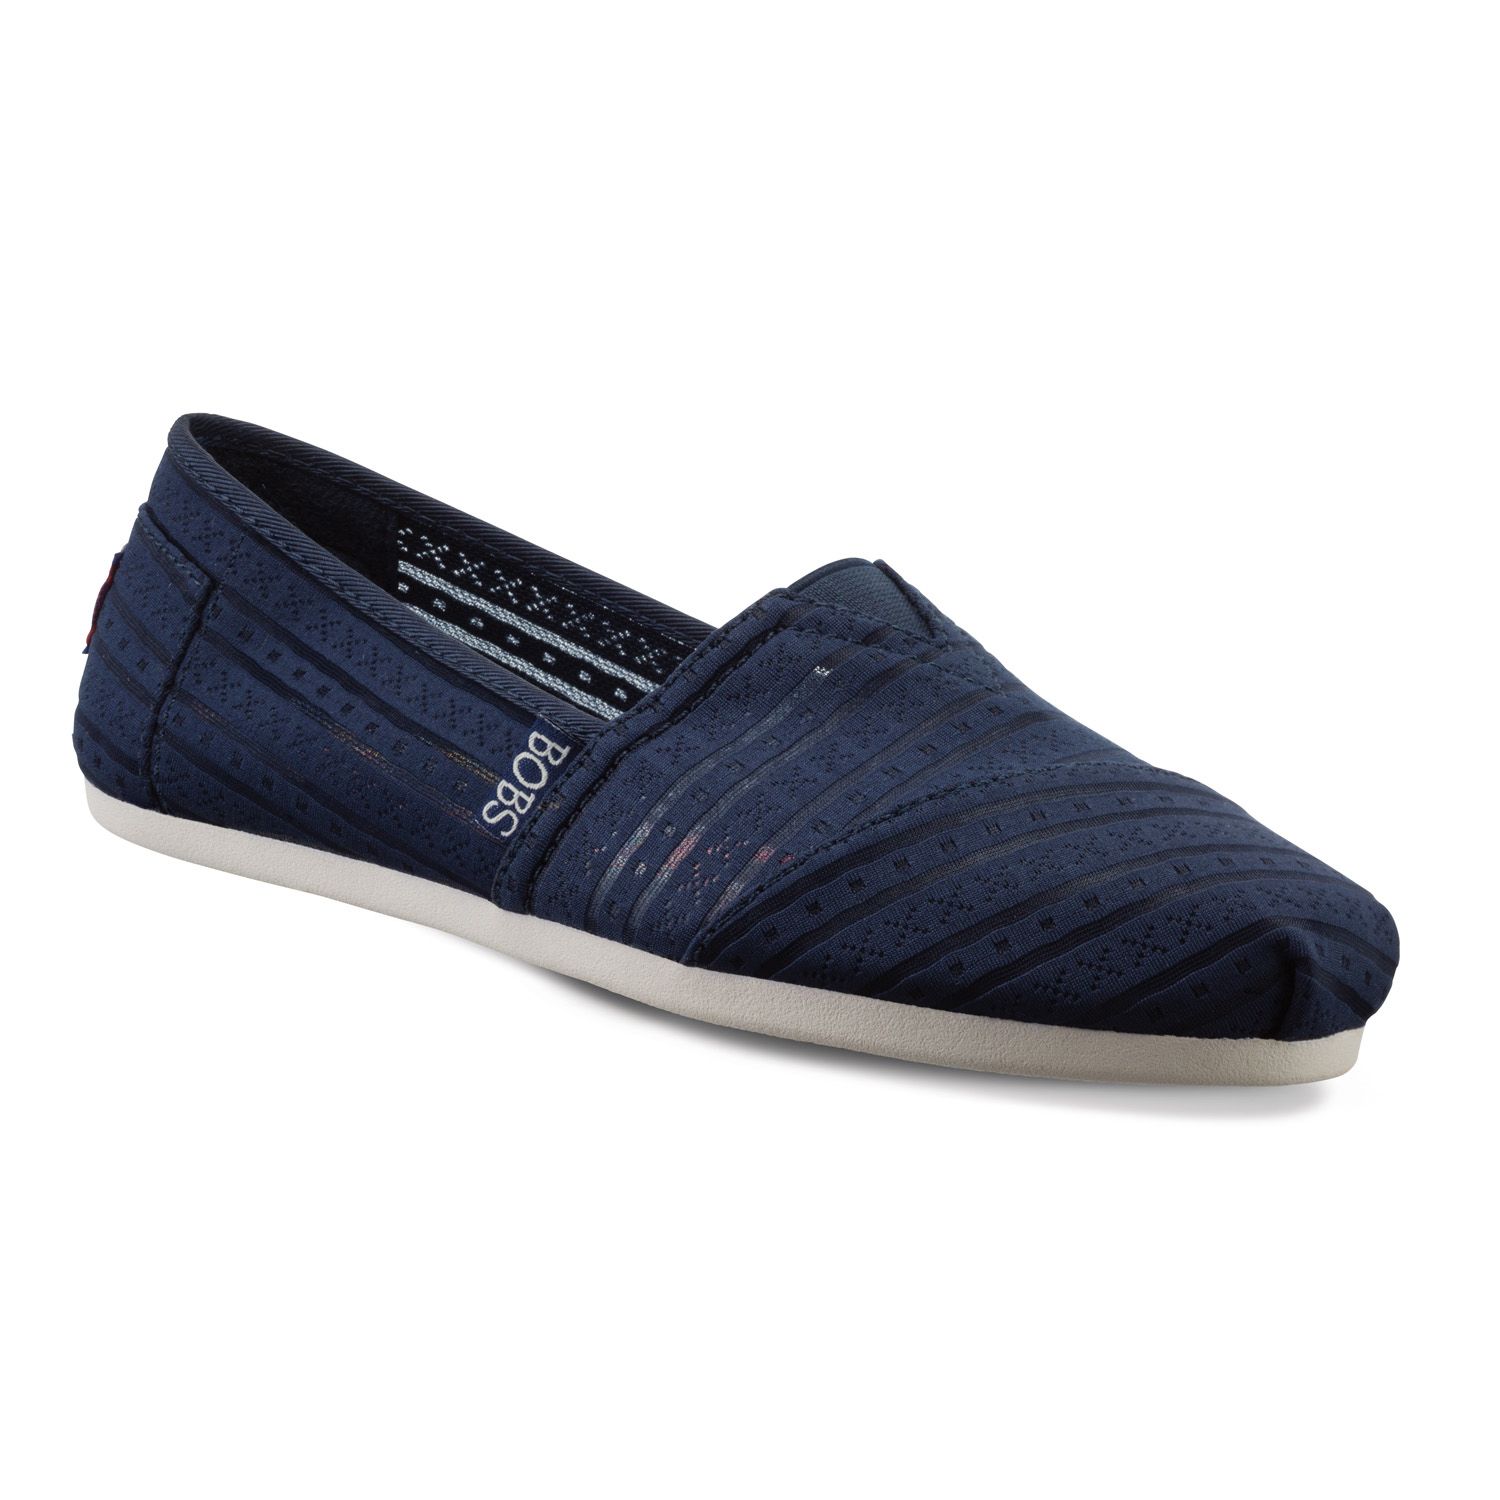 bobs navy blue shoes